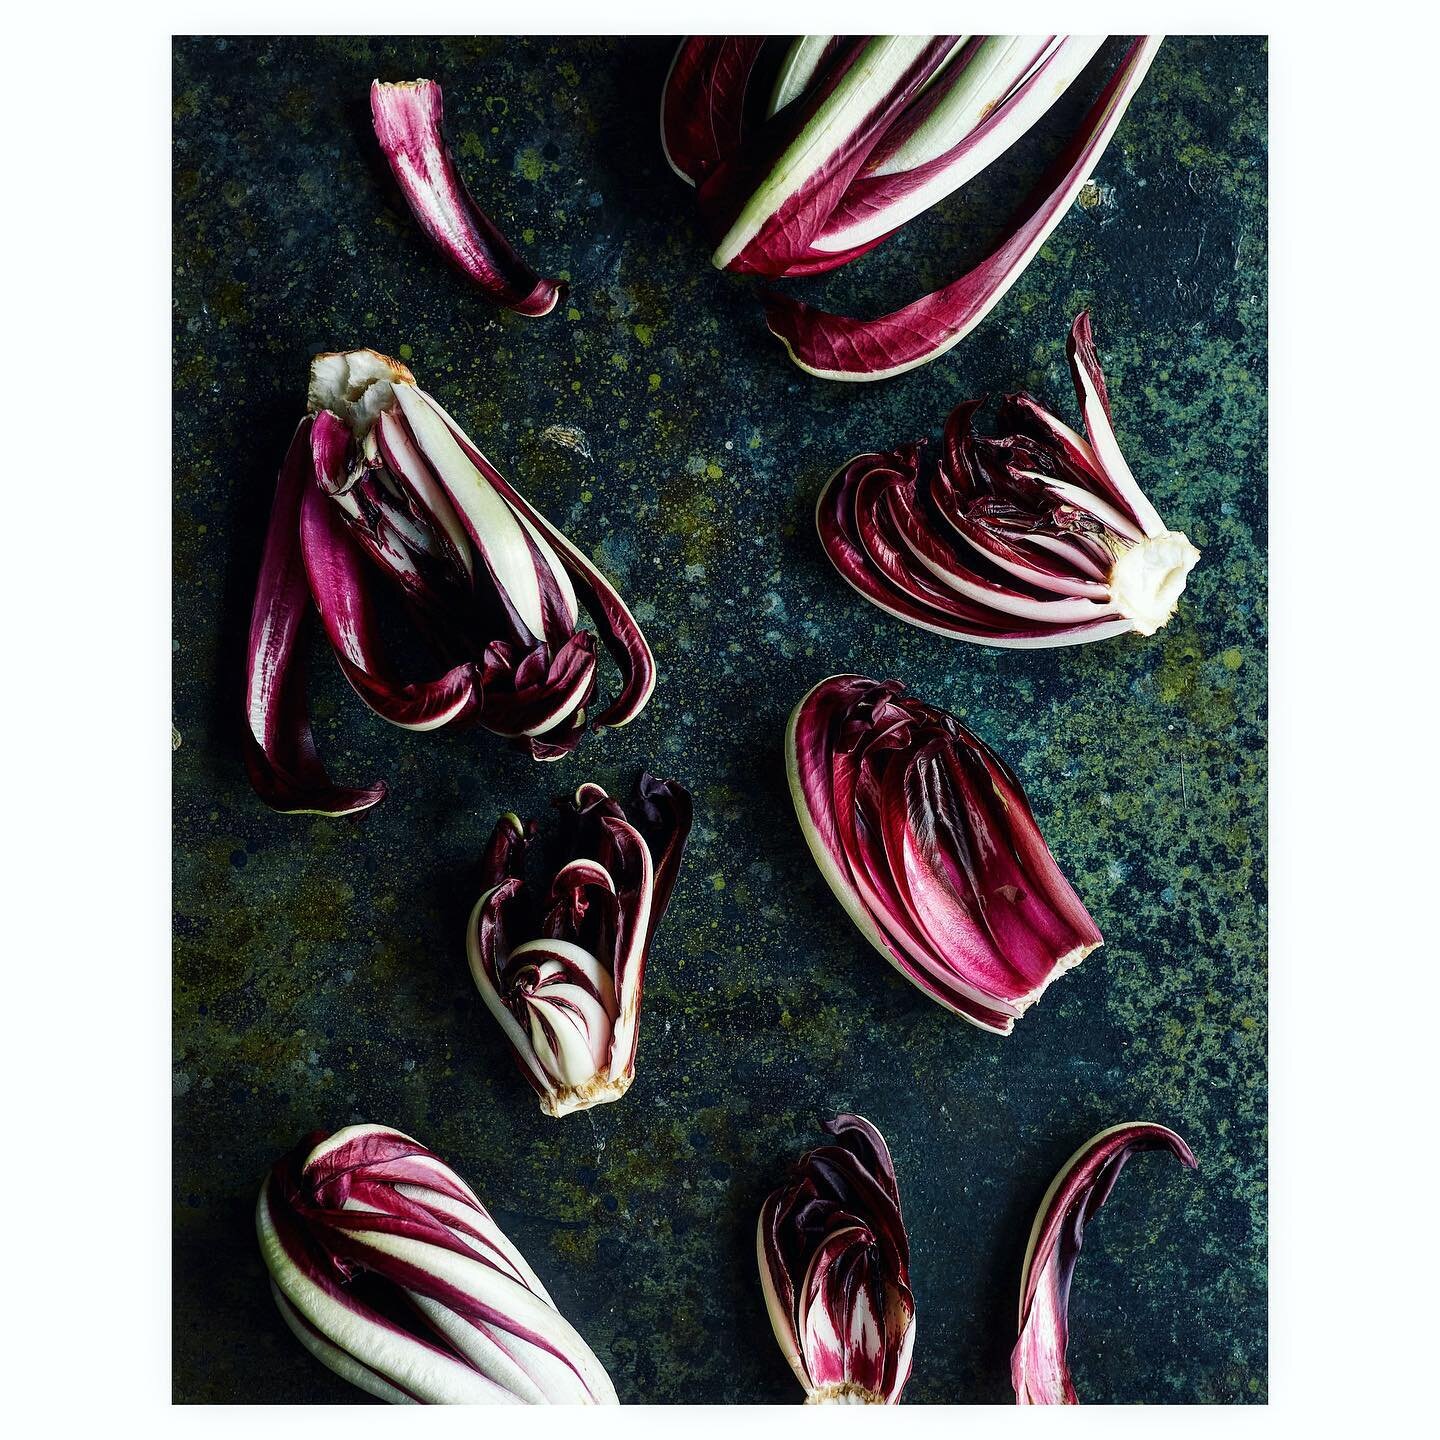 Super model ingredients, before and after 🔪 beautiful day with @melissarjphoto 📸 with amazing back drops from @prop_drop_ 🎨 and ingredients from the delectable @bora_sons 🍆🥬🍅🥒 #foodstyling #foodphotography #ingredients #colour #radicchio #aube